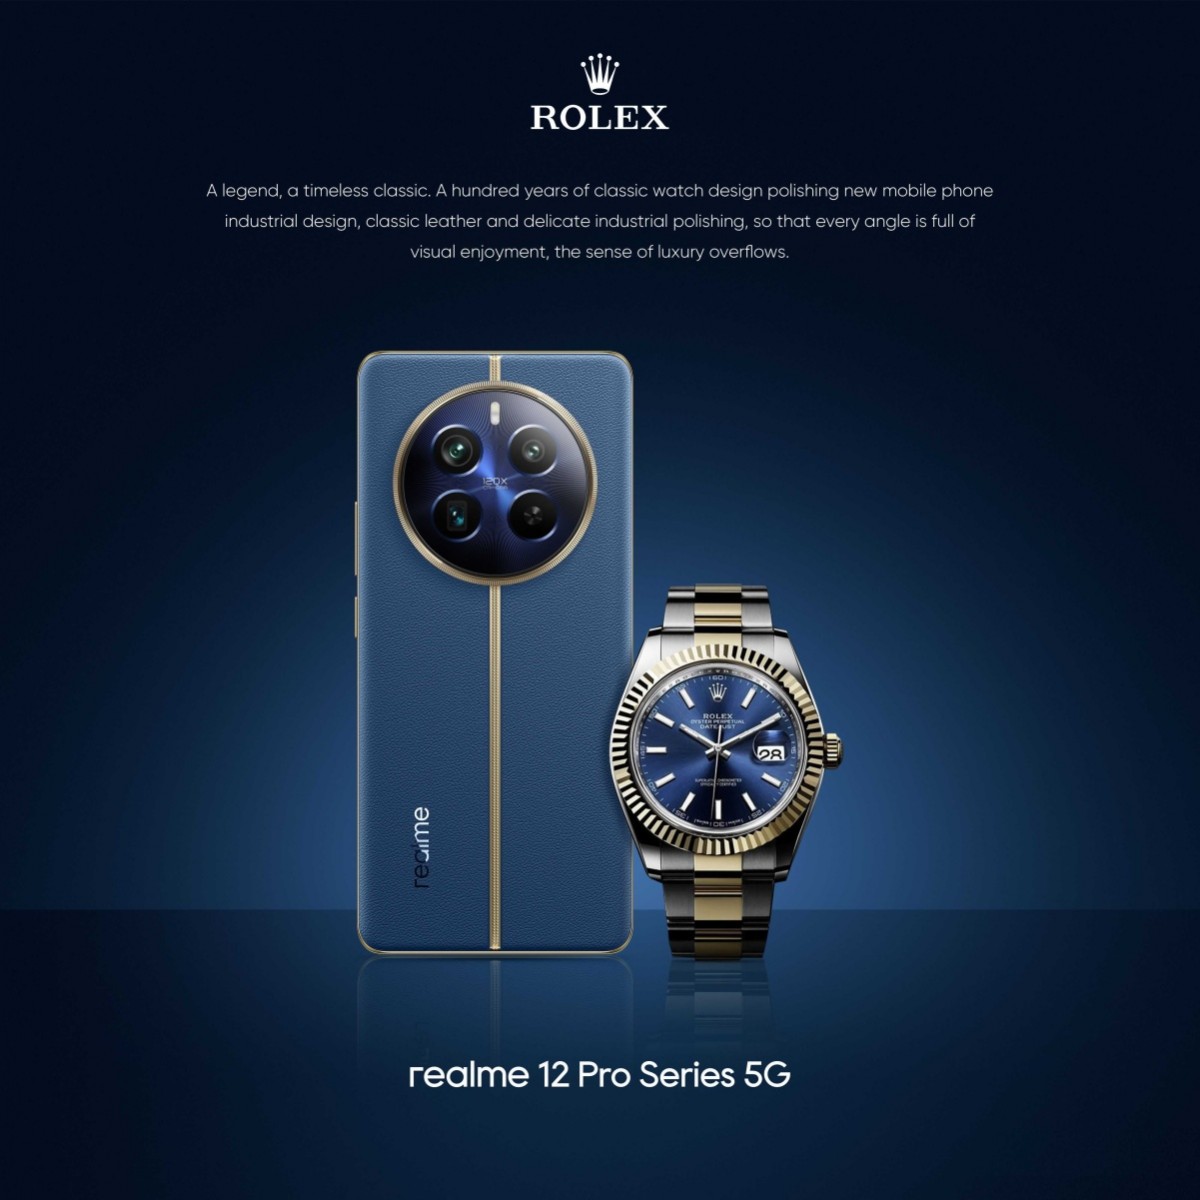 Realme will partner with Rolex in upcoming 12 Pro series